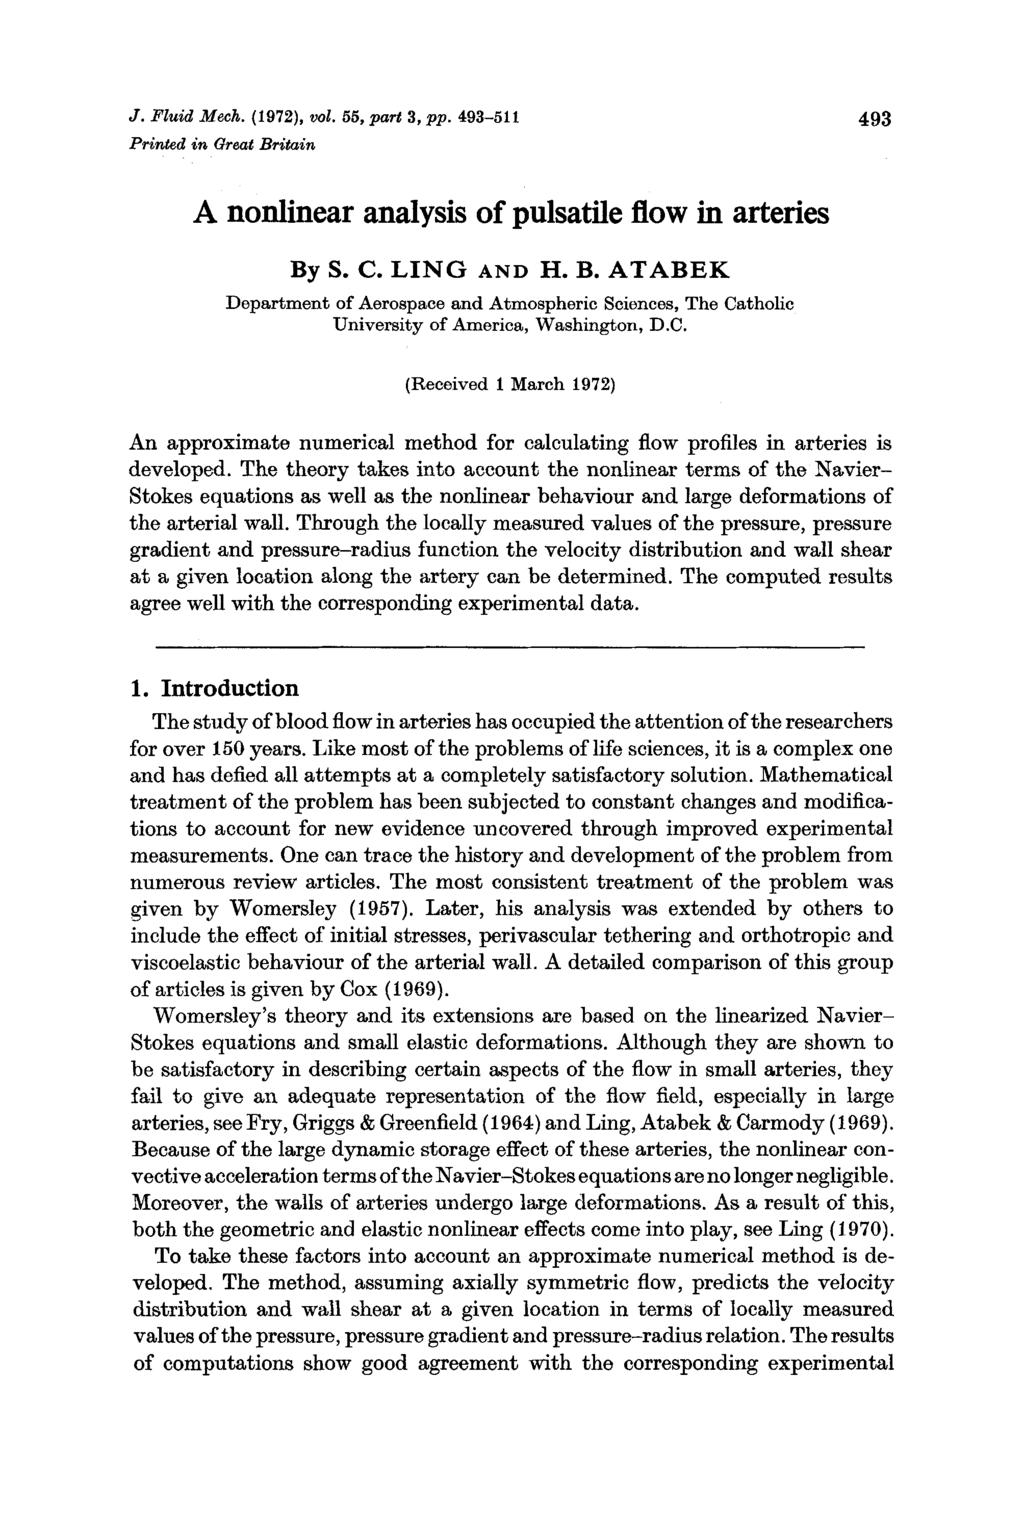 J. Fluid Mech. (1972), vol. 55, part 3, pp. 493-511 Printed in Great Britain 493 A nonlinear analysis of pulsatile flow in arteries LA72 By S. C. LING AND H. B. ATABEK Department of Aerospace and Atmospheric Sciences, The Catholic University of America, Washington, D.